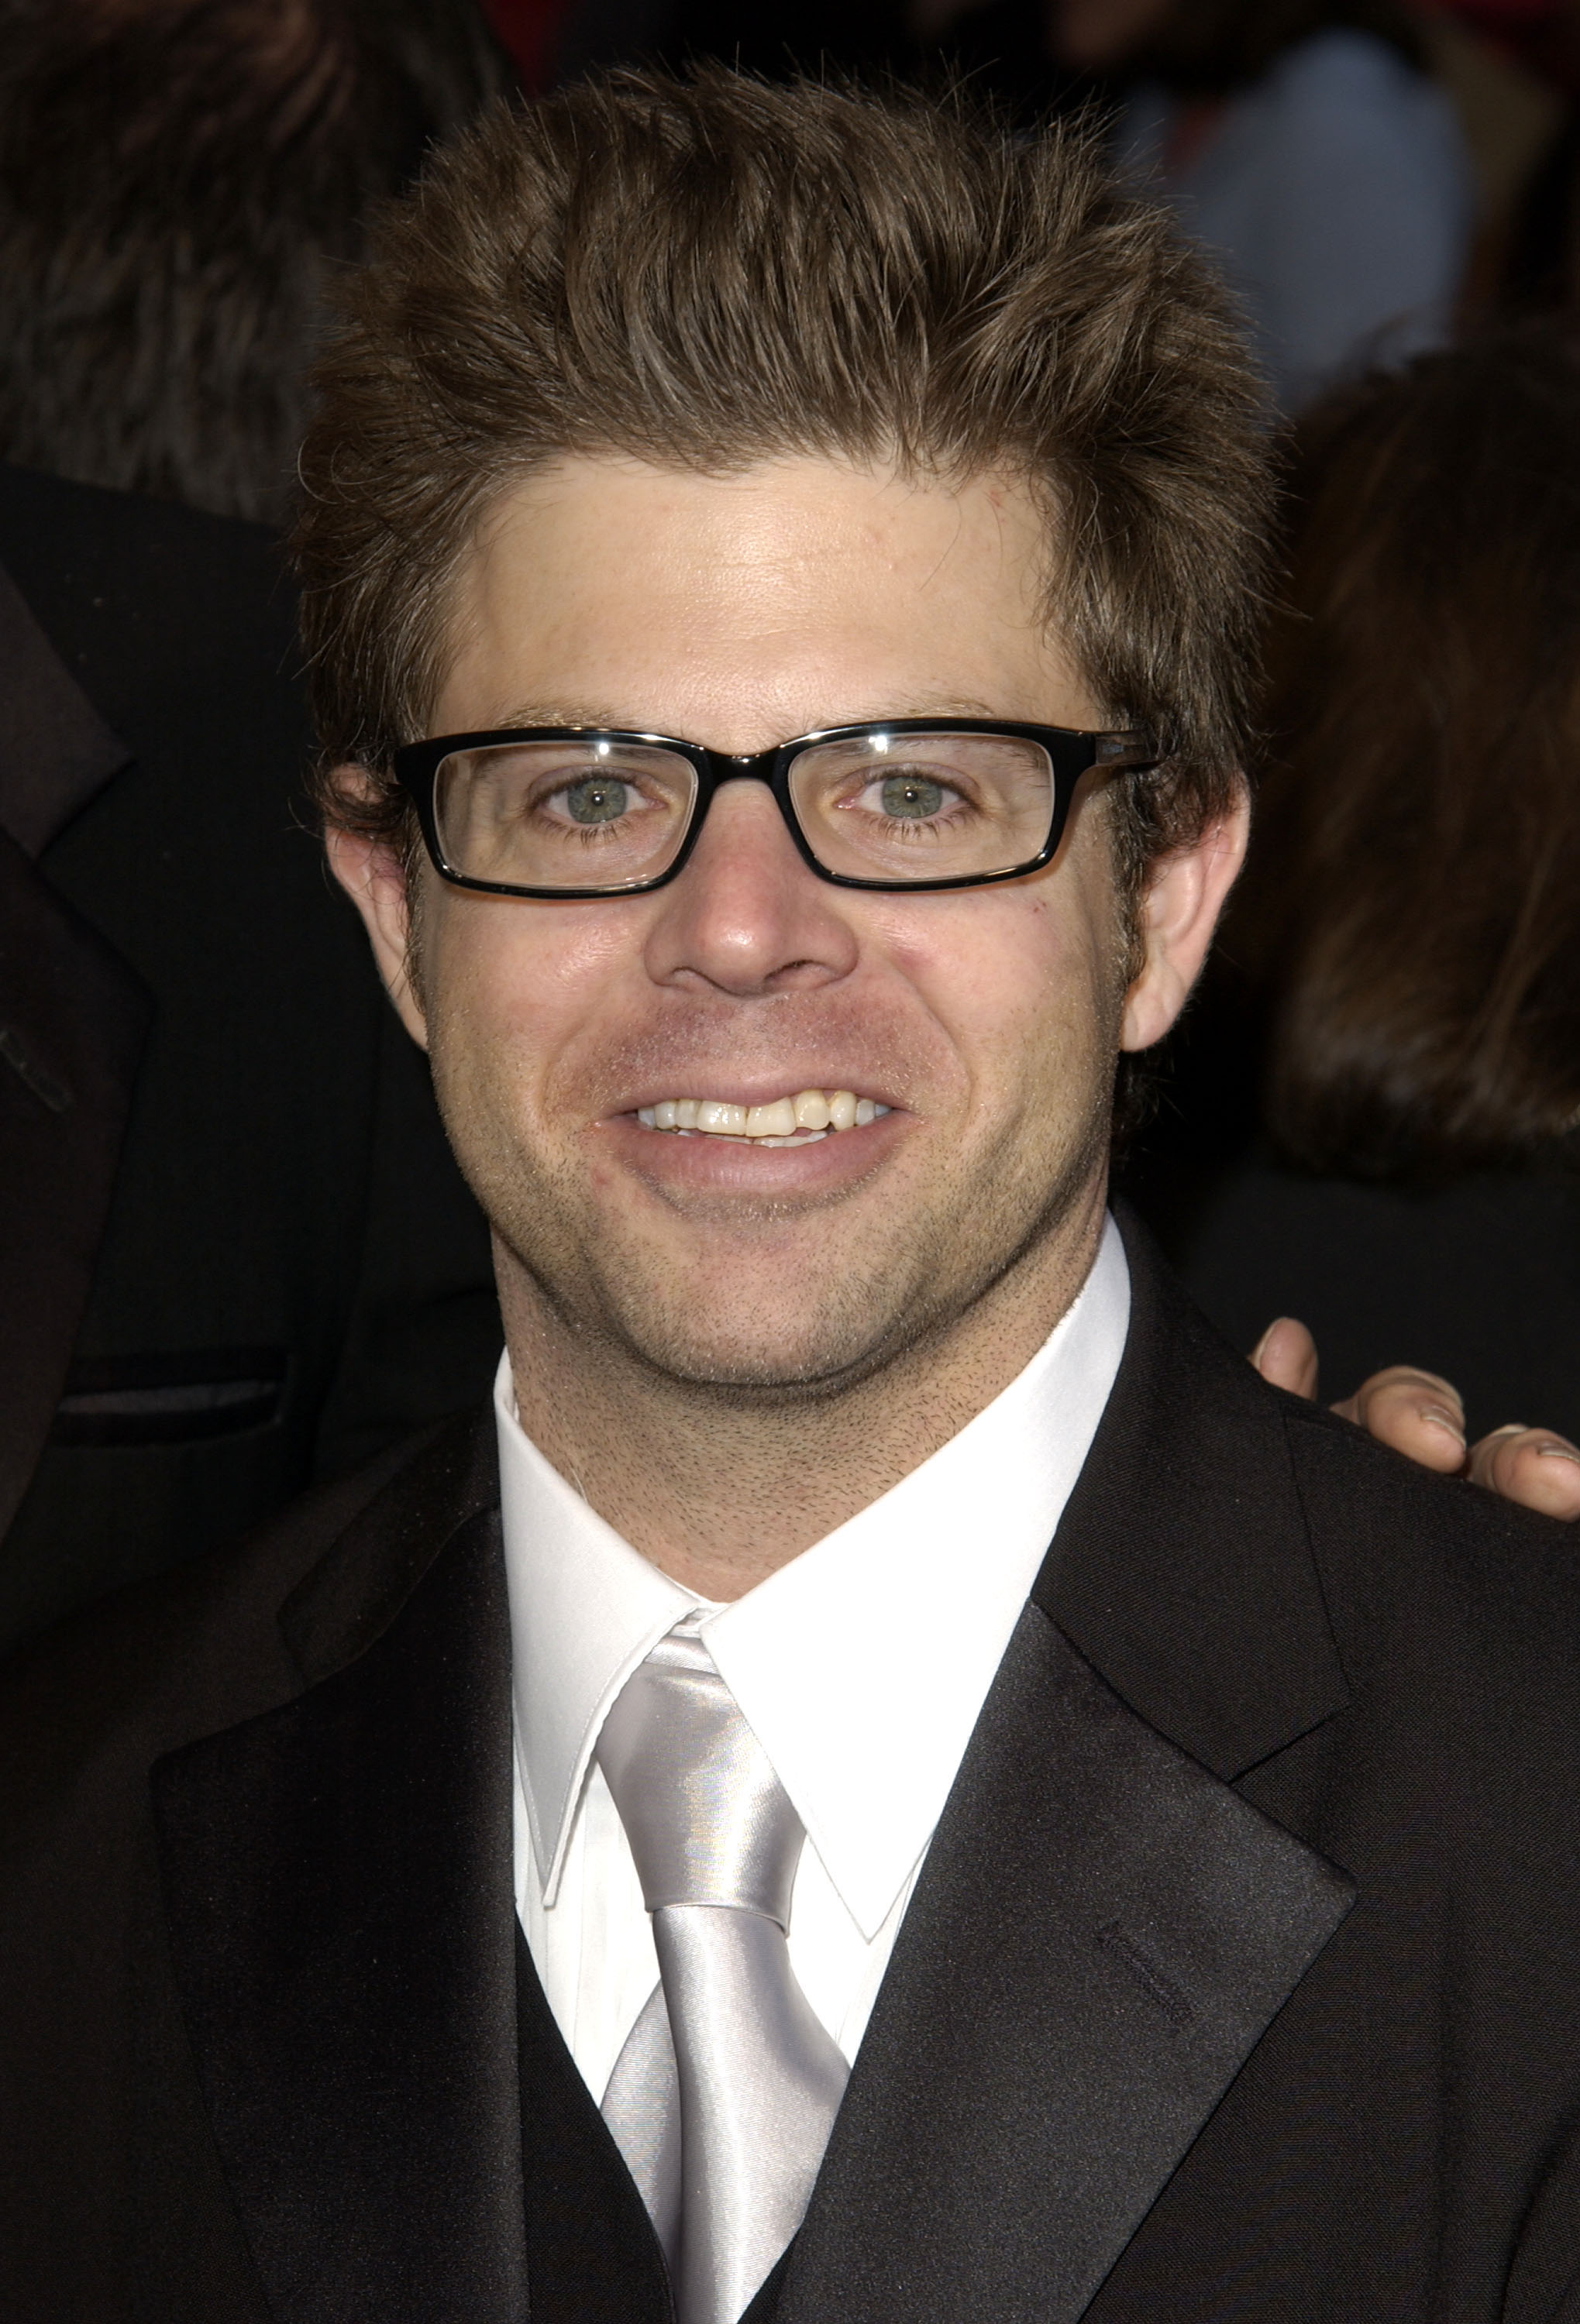 Adam Rich during ABC's 50th Anniversary Celebration at The Pantages Theater on March 16, 2003 in Hollywood, California | Source: Getty Images